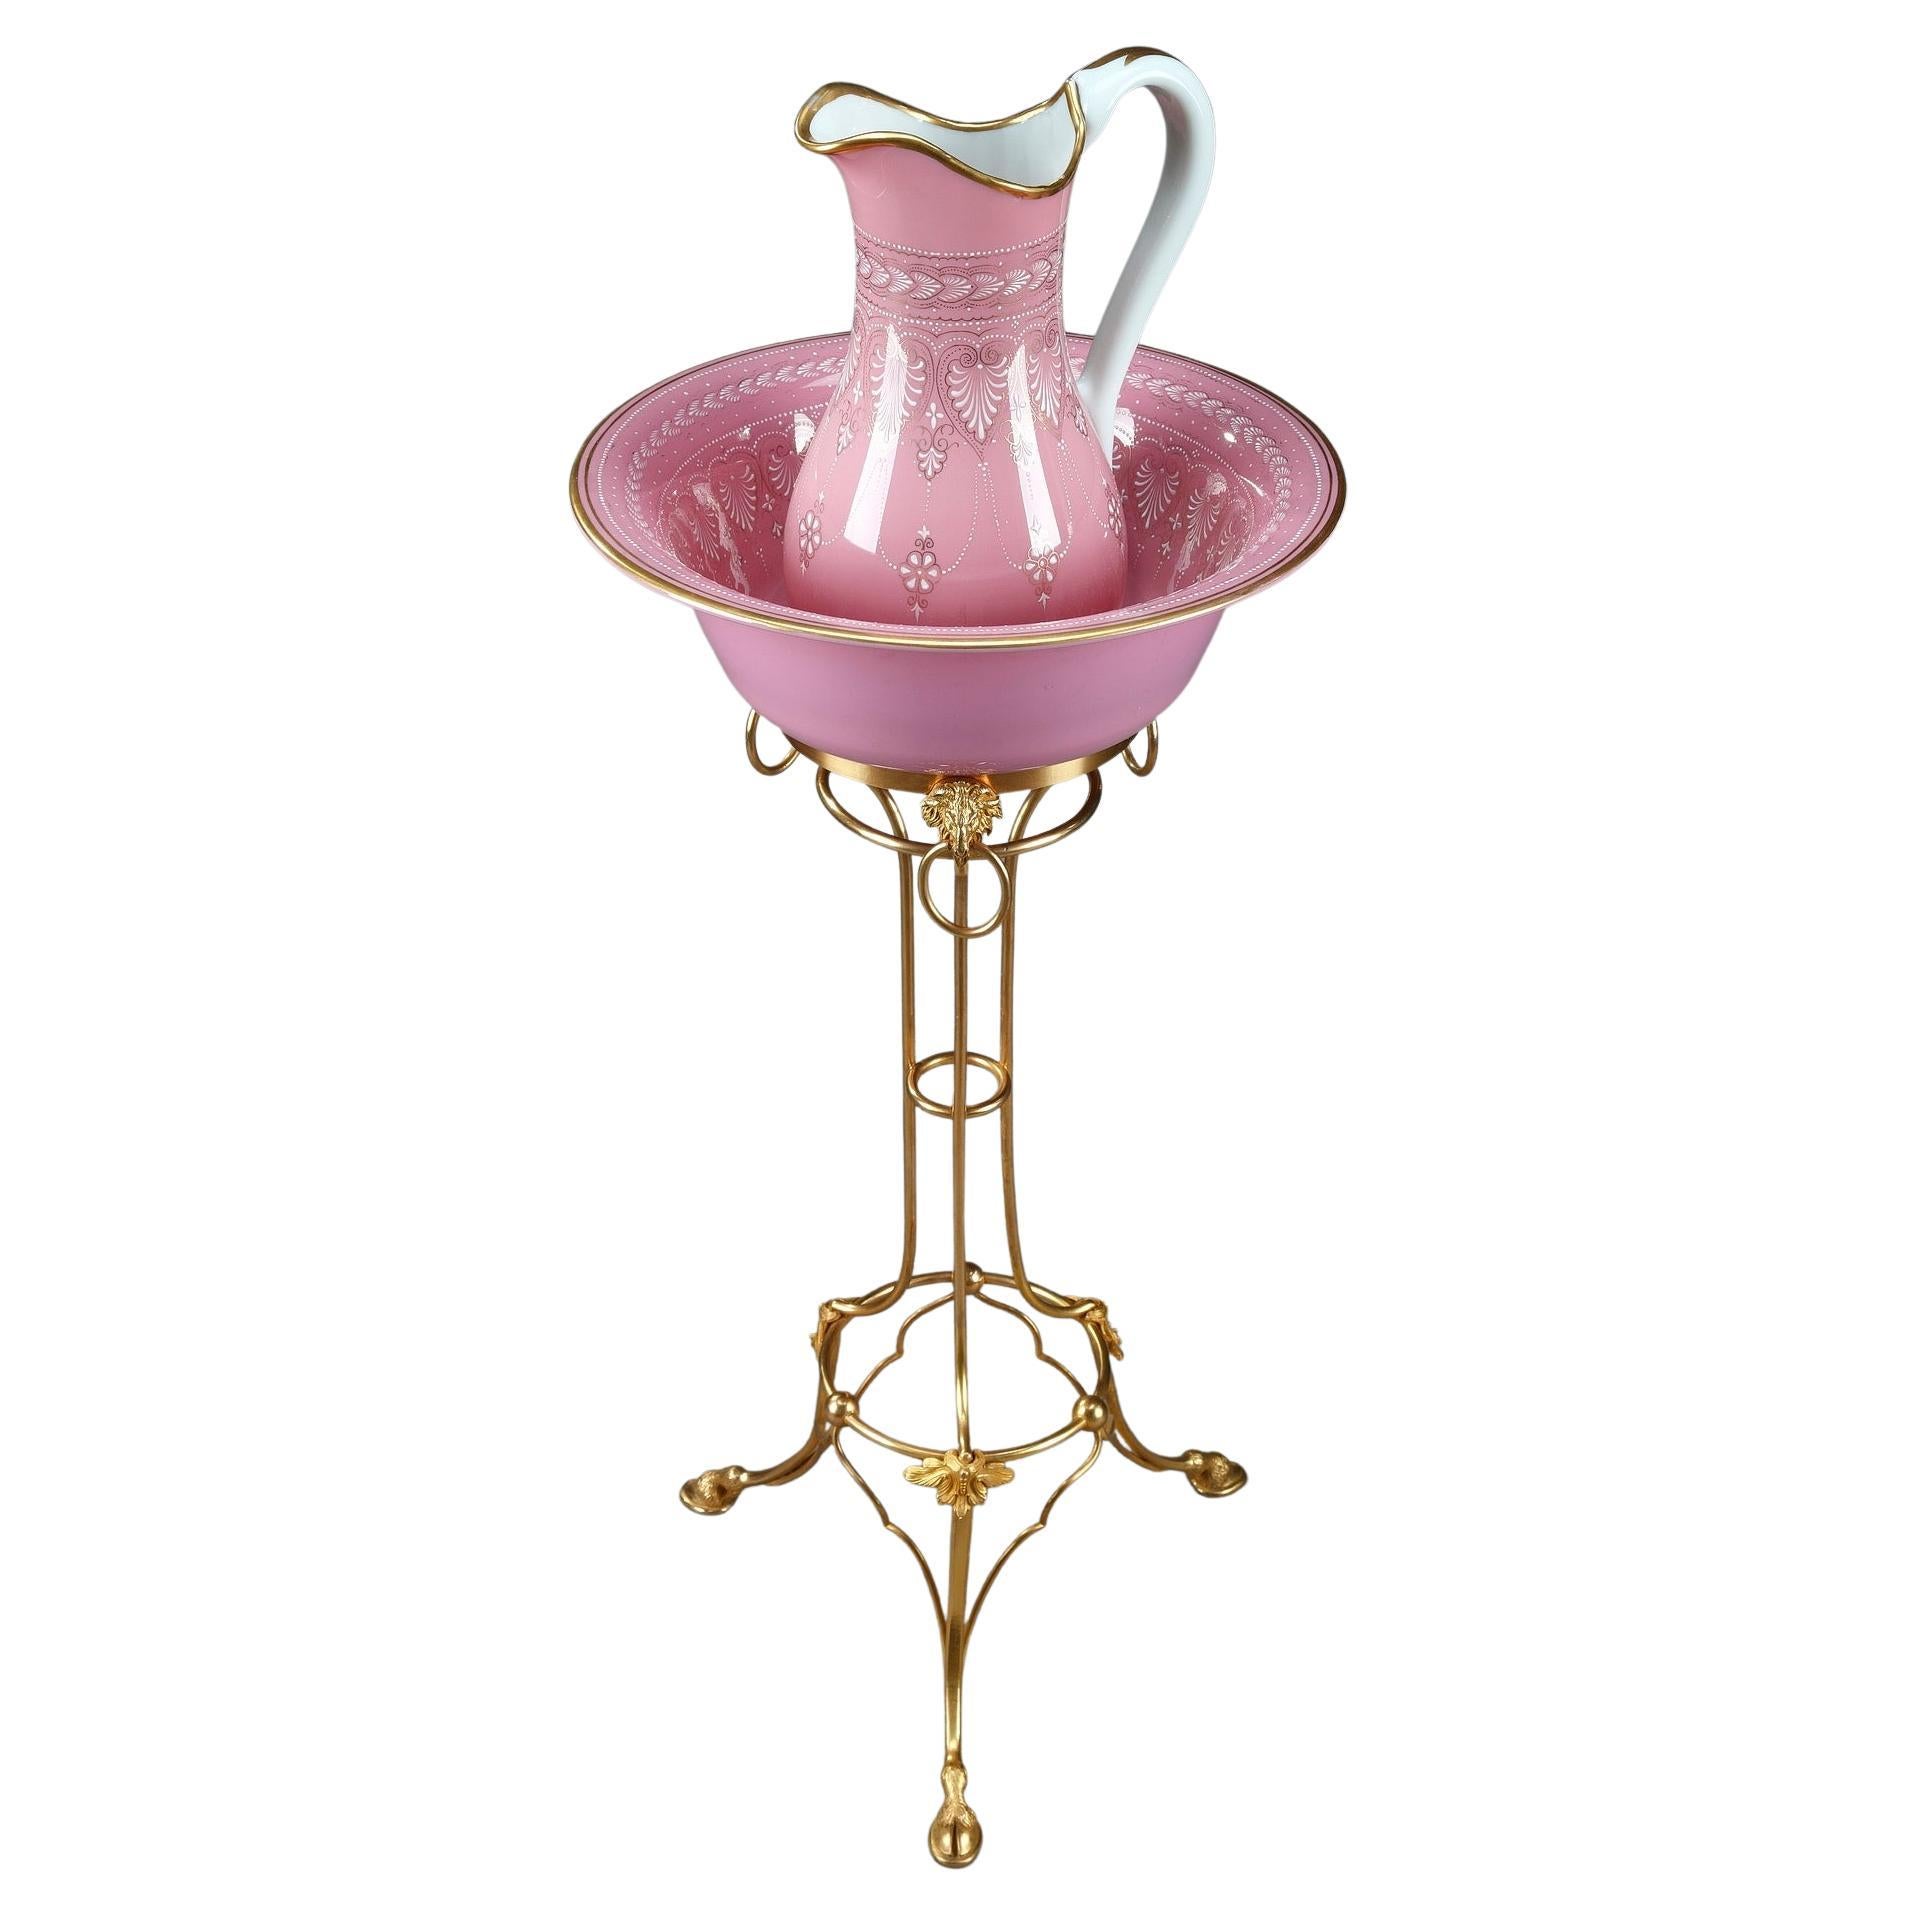 Pitcher and Its Opaline Basin on a Gilt Bronze Base, 19th Century